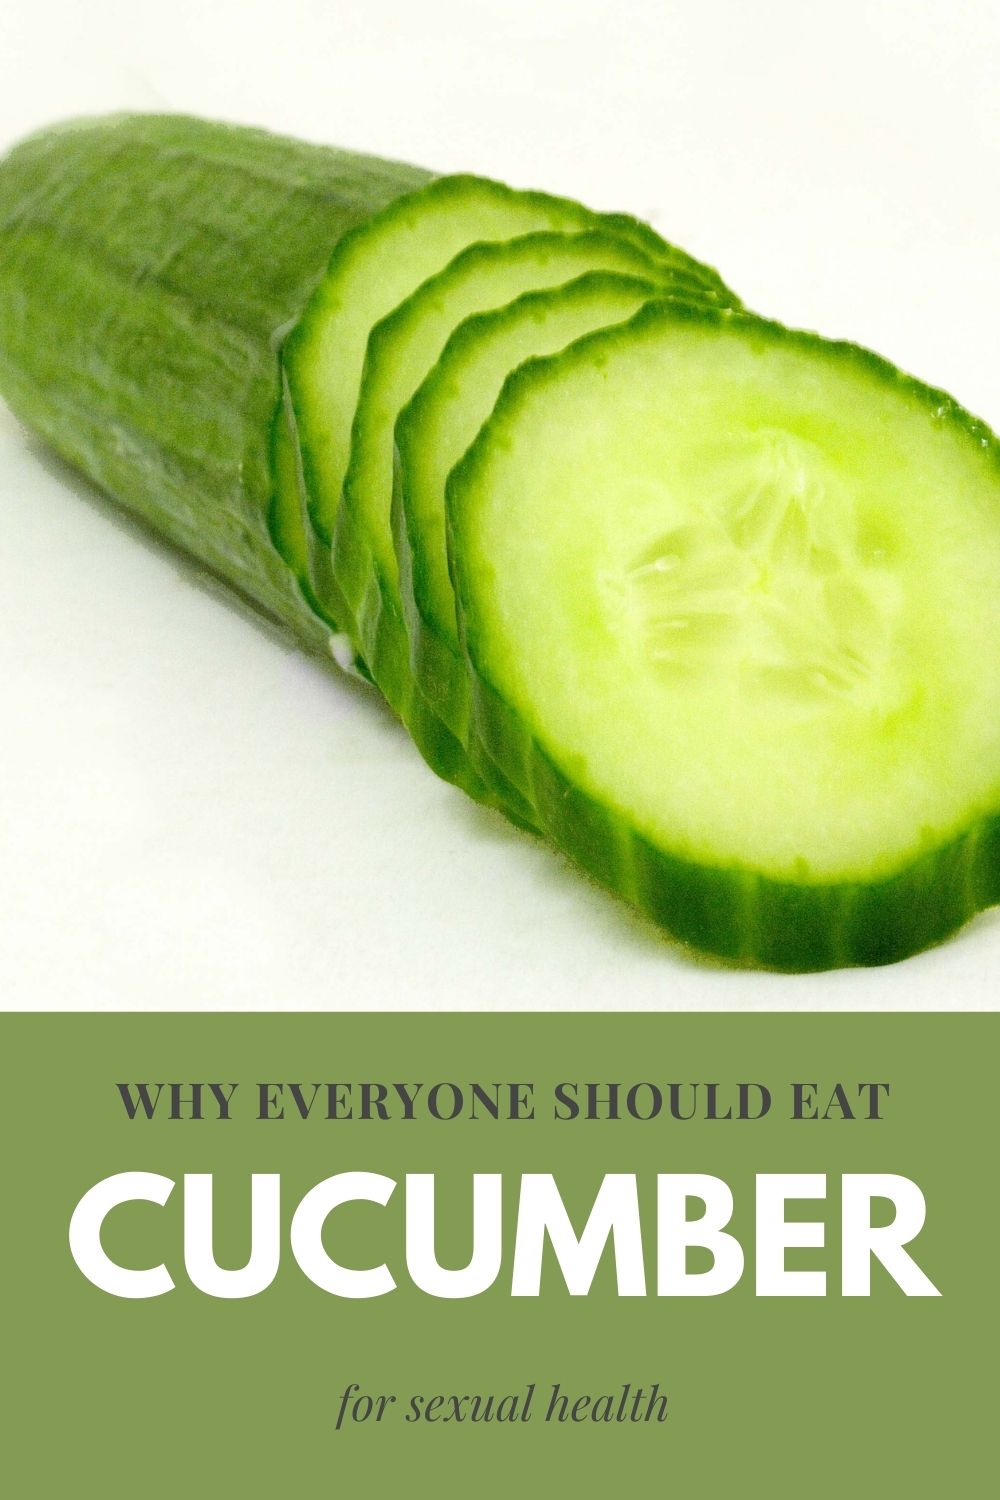 importance of cucumber sexually graphic